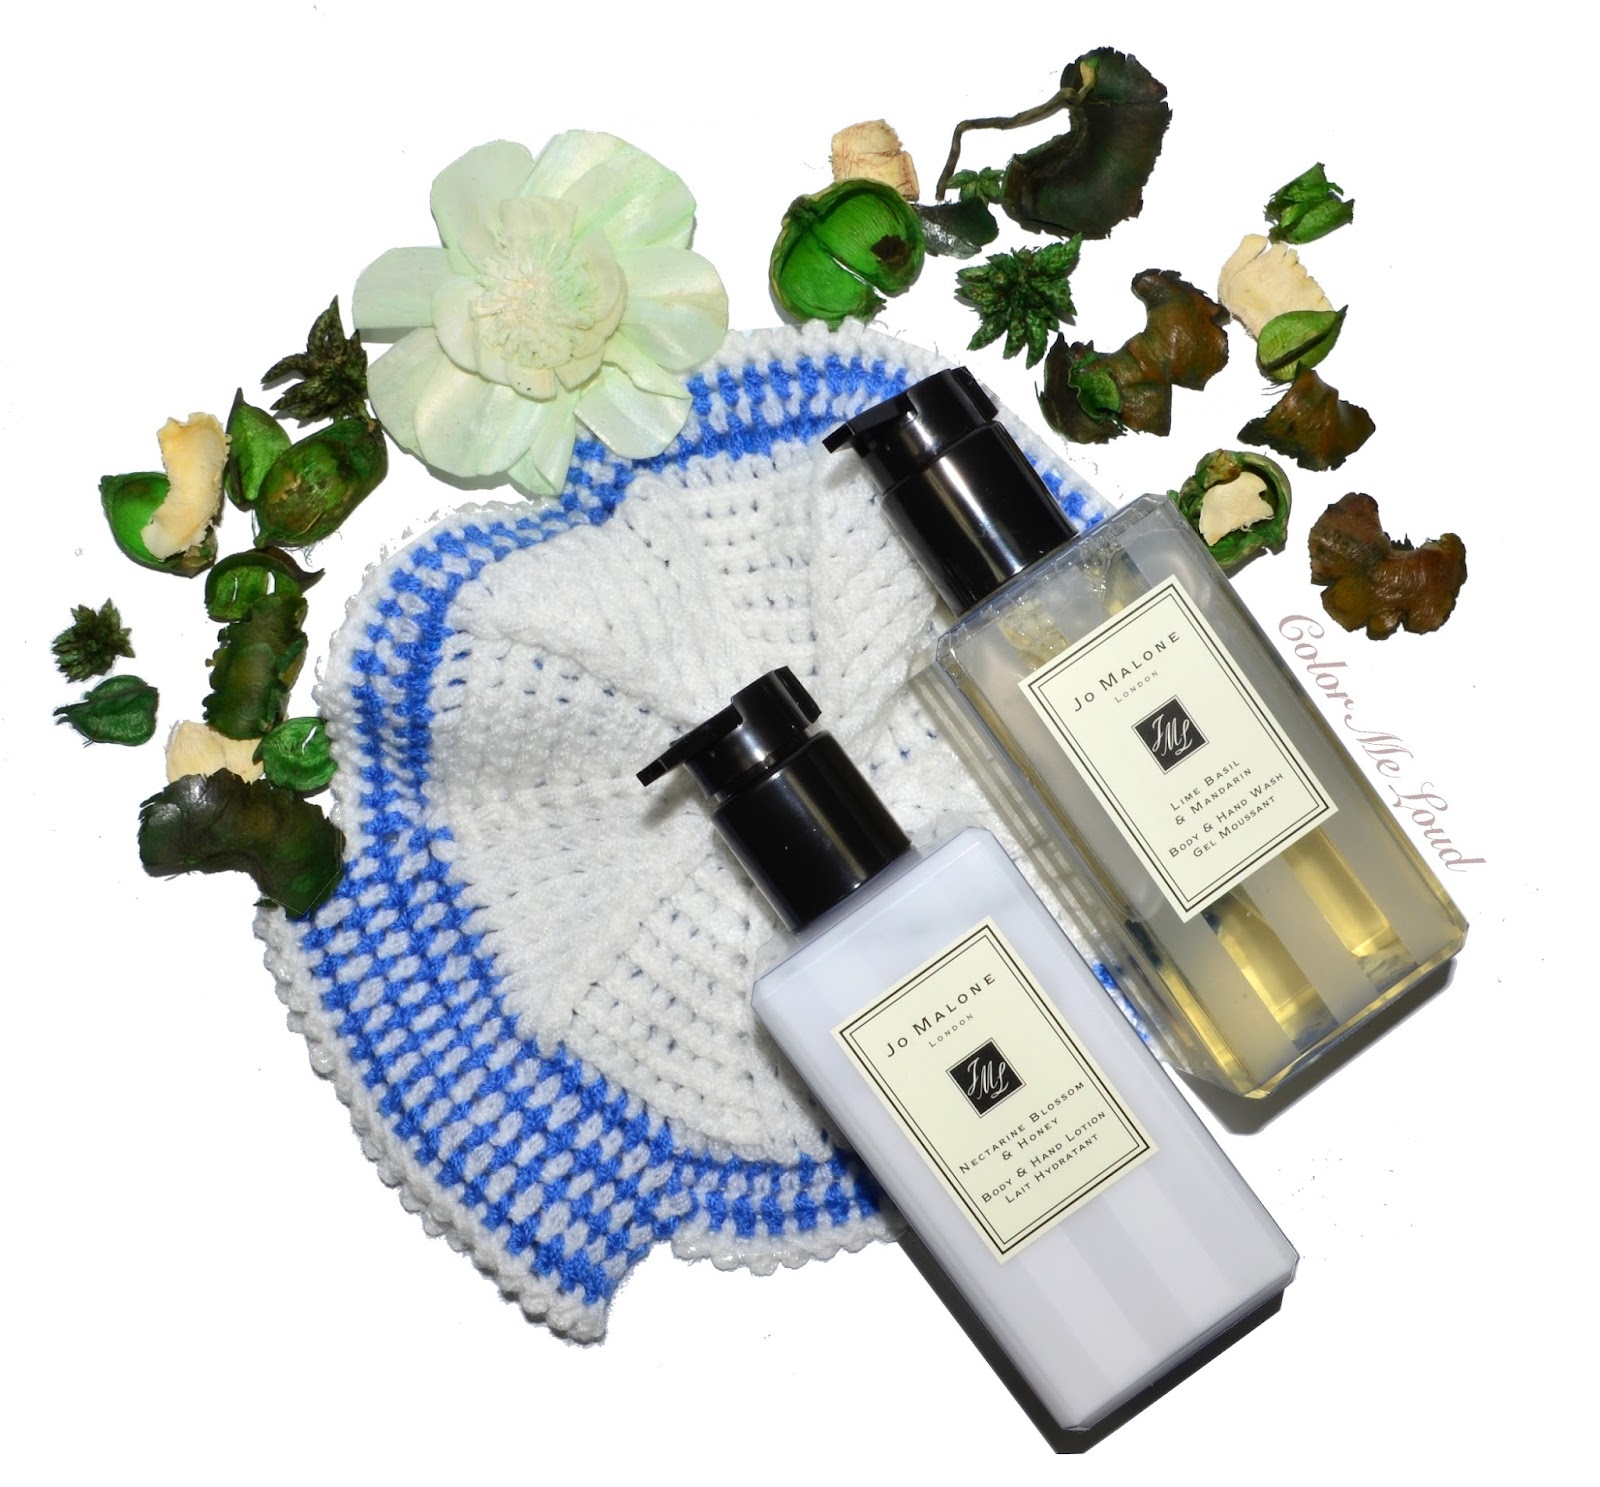 Jo Malone Lime Basil & Body Hand Wash, Nectarine Blossom & Honey Body and Lotion, Review | Color Me Loud